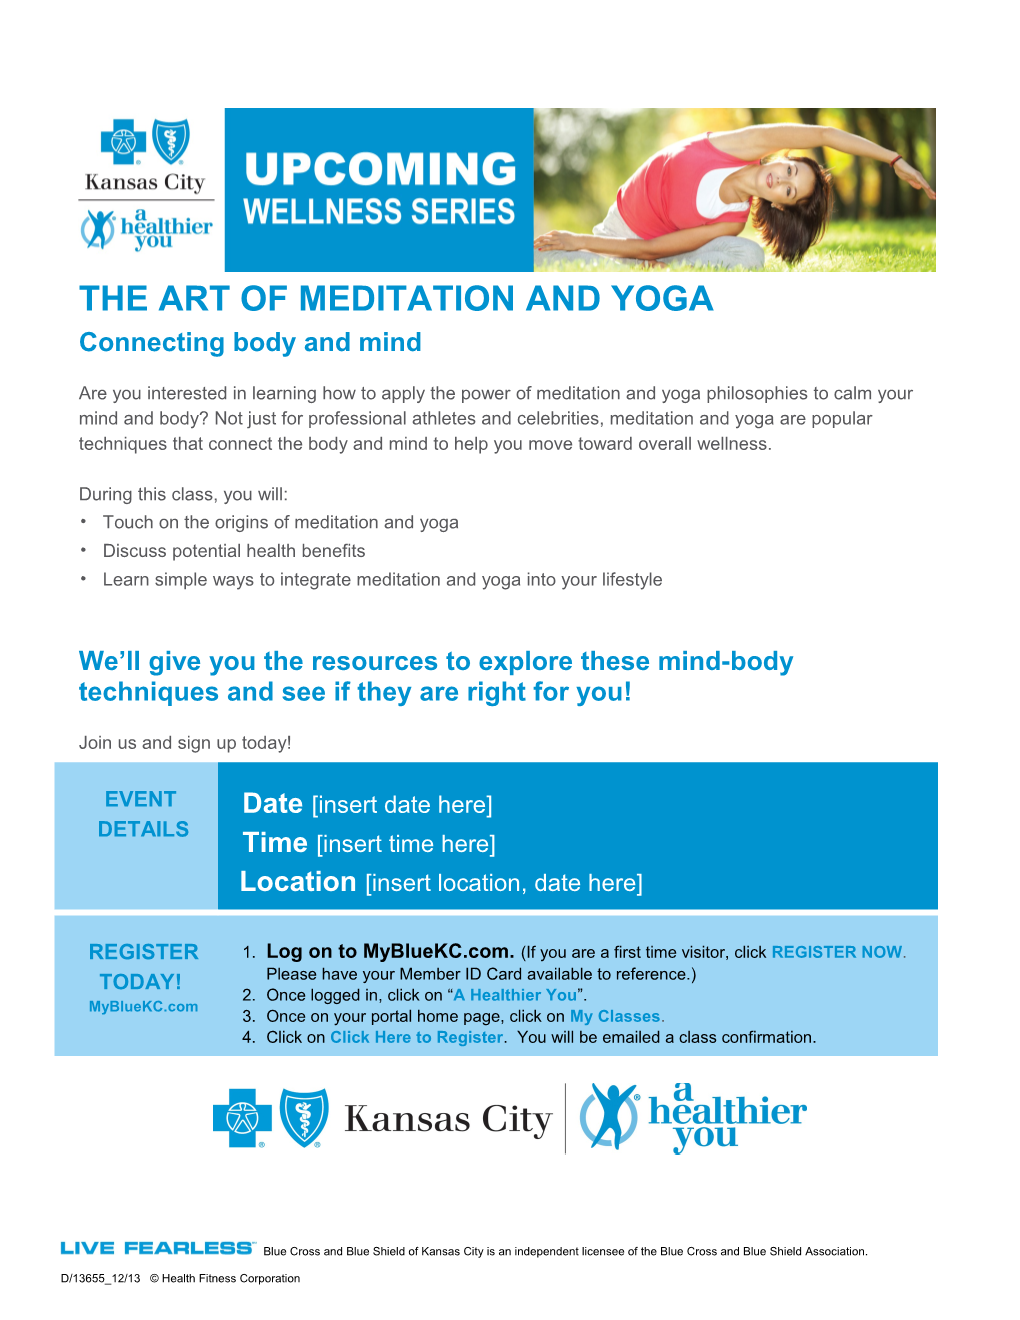 Blue Cross and Blue Shield of Kansas City Is an Independent Licensee of the Blue Cross